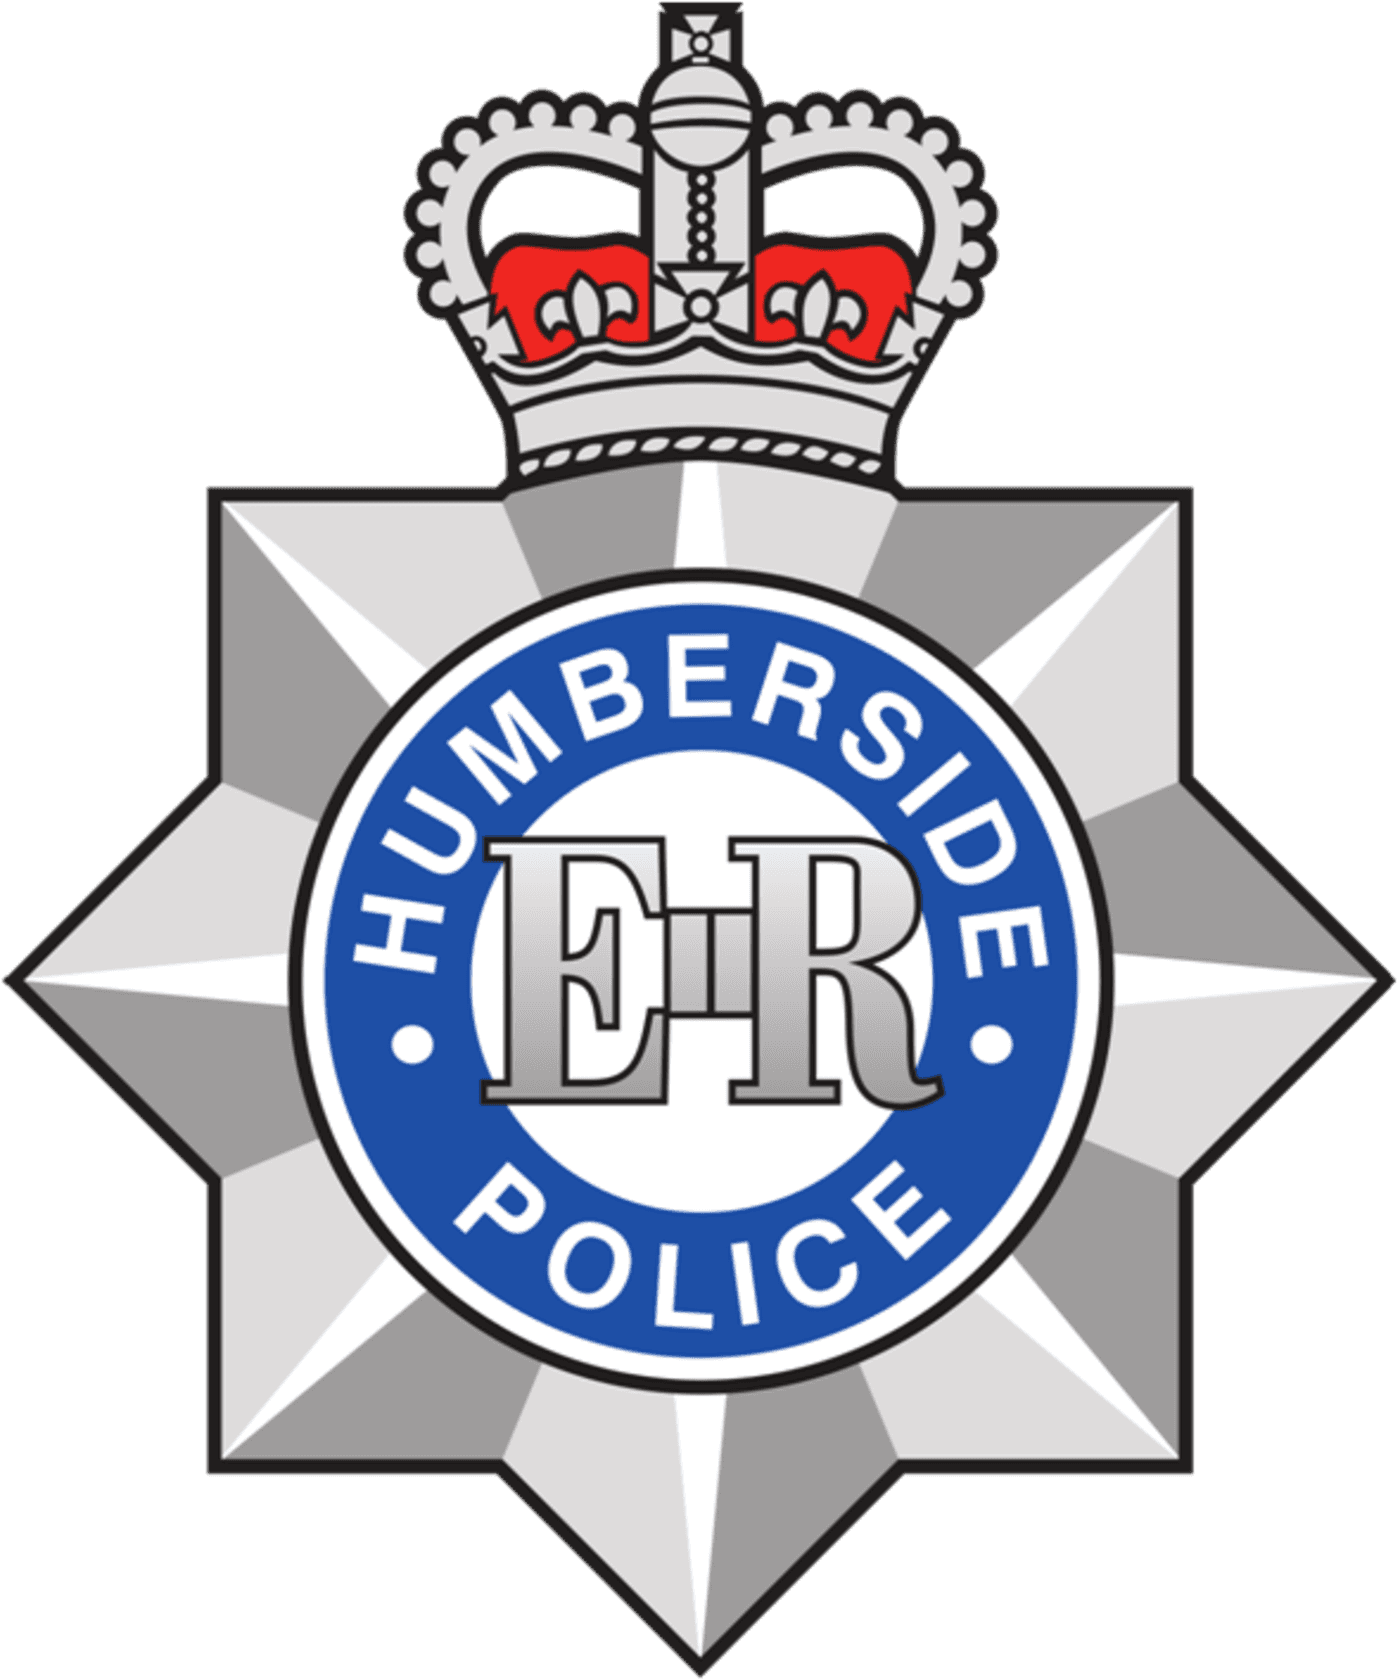 Humberside Police - Better Together Event Invitation